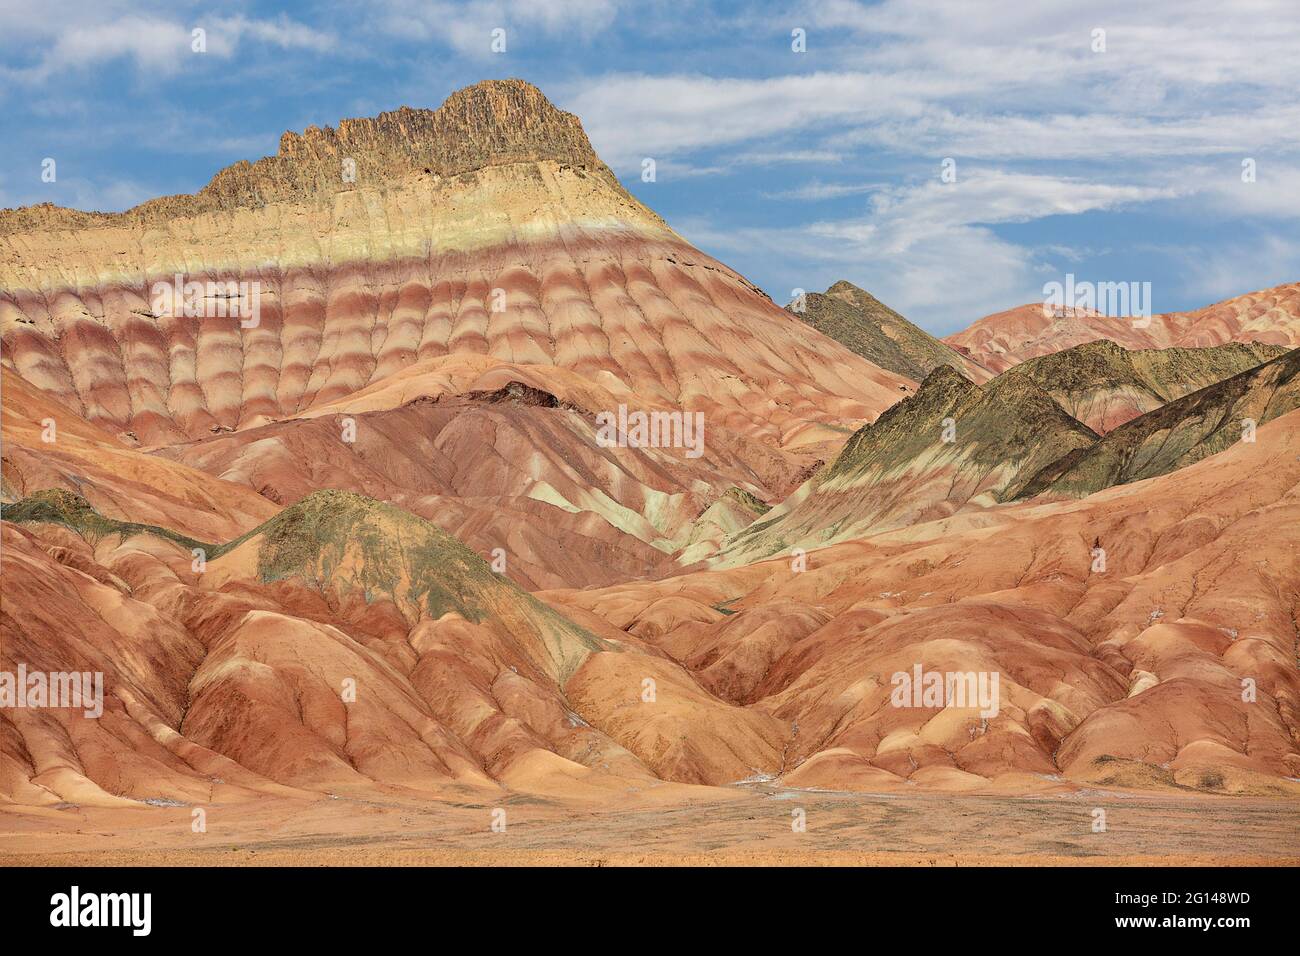 View over the rock formations shaped by erosion in the desert between Kashan and Qom in Iran Stock Photo